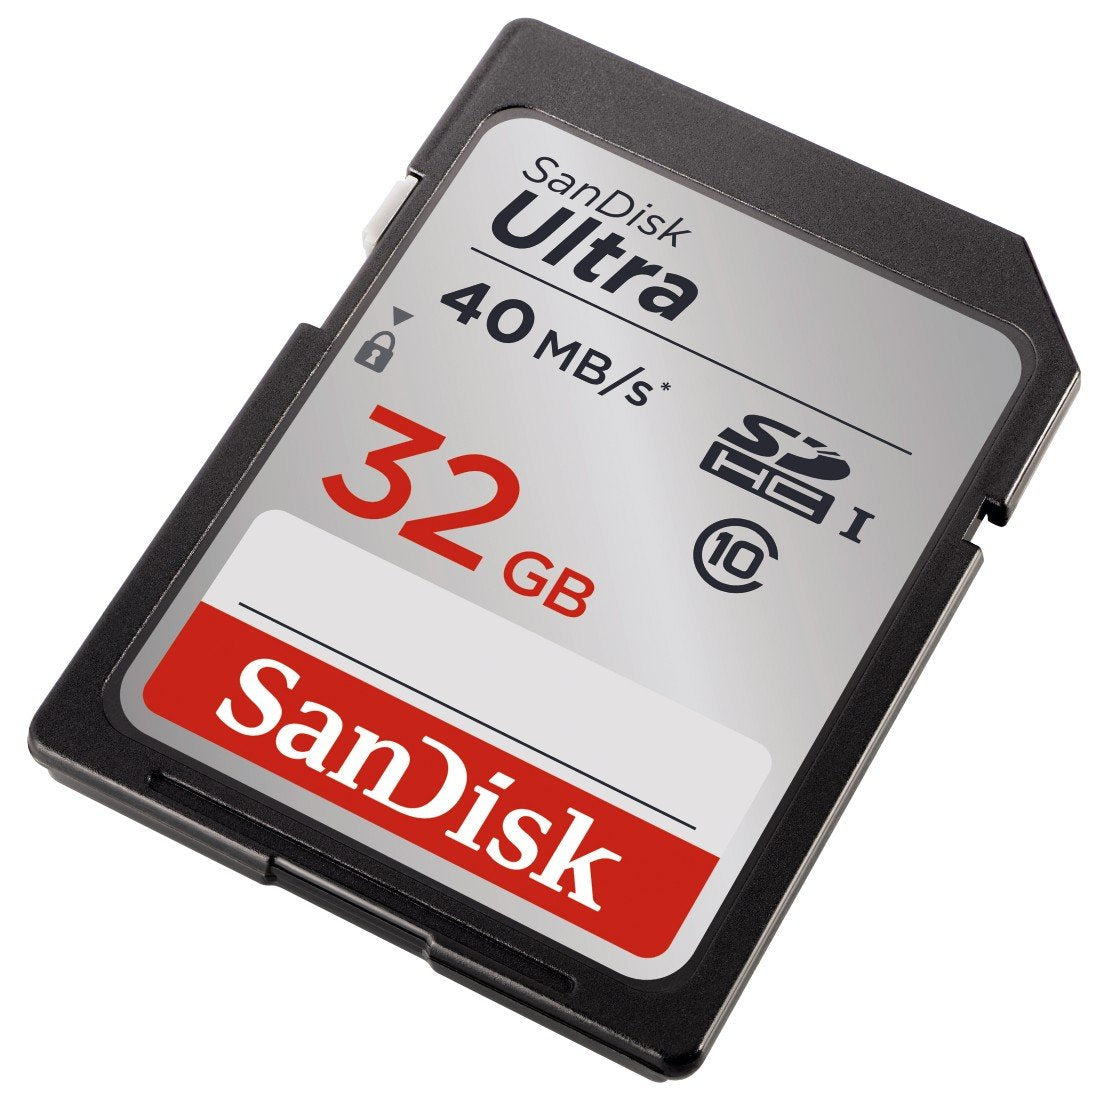 SanDisk Ultra 32GB Class 10 SDHC Memory Card Up to 40MB/s